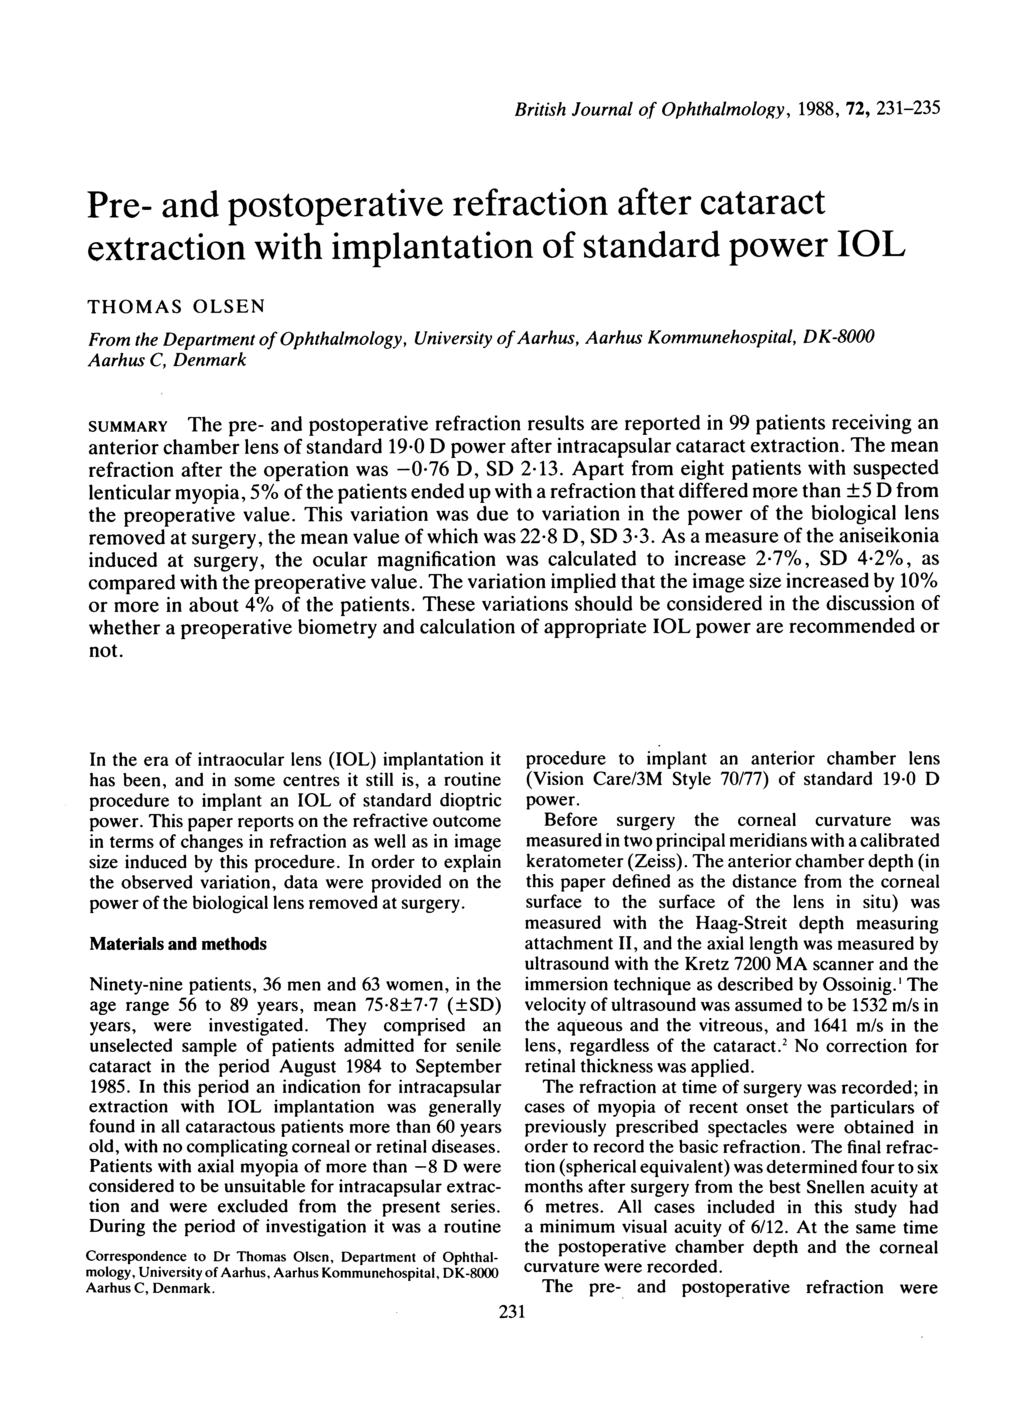 British Journal of Ophthalmology, 1988, 72, 231-235 Pre- and postoperative refraction after cataract extraction with implantation of standard power IOL THOMAS OLSEN From the Department of